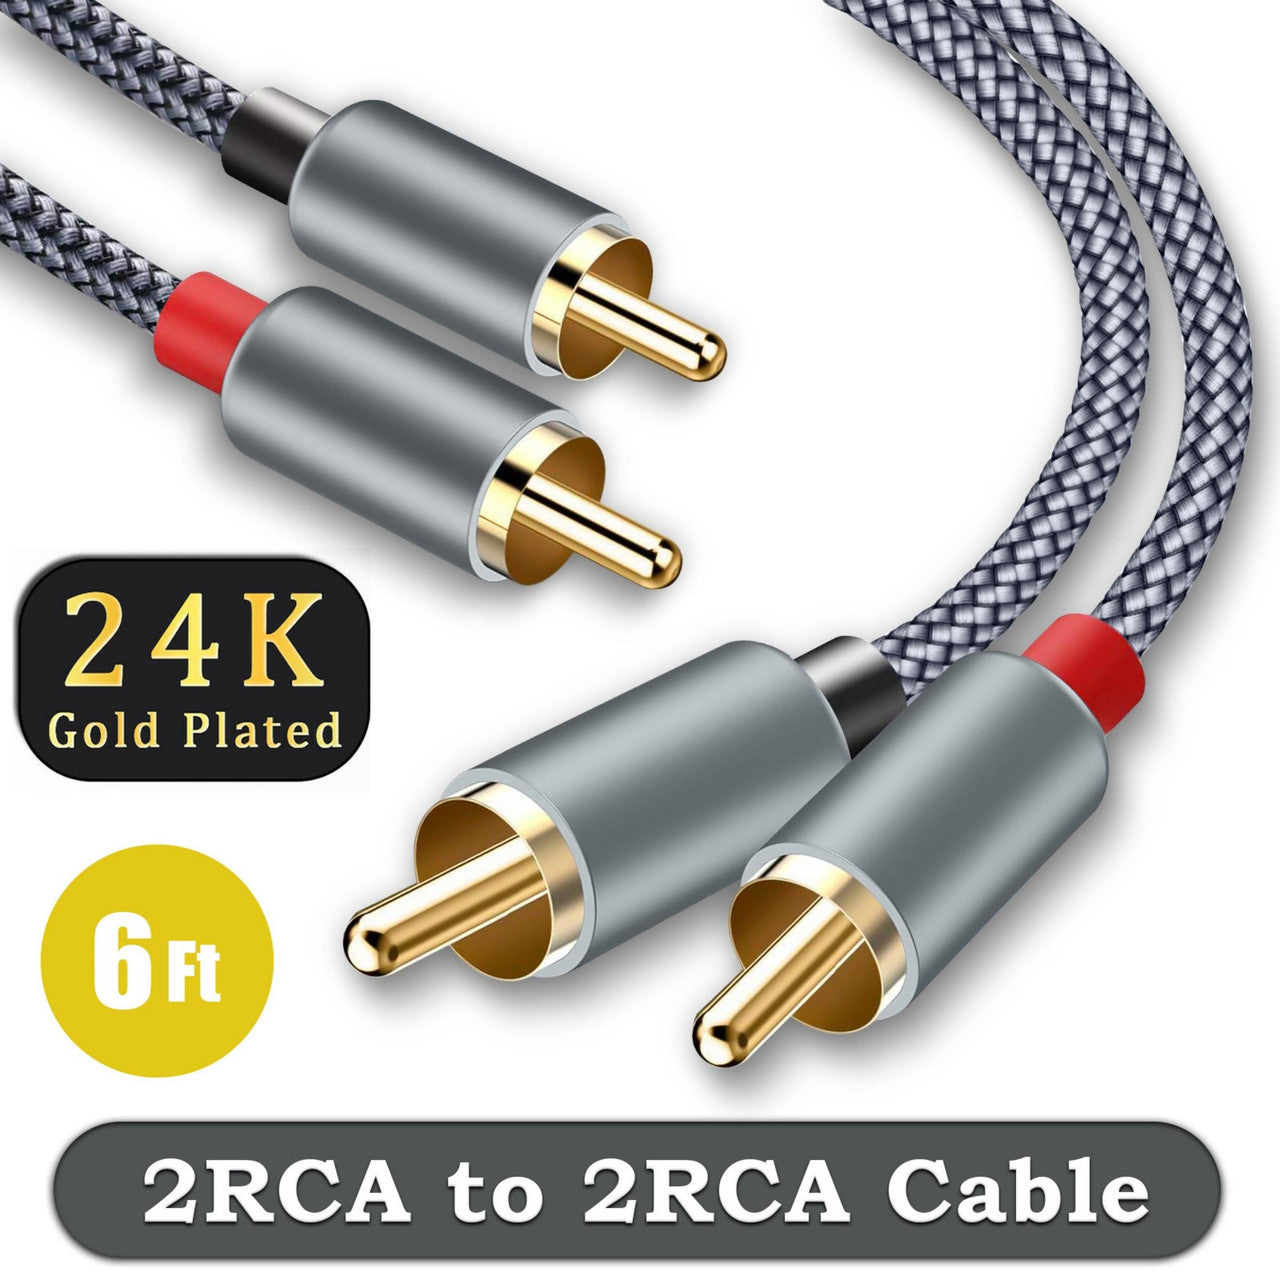 2 Packs Rca M/M Stereo Audio Cable - 6FT Rca Male Audio Stereo Subwoofer Cable, 6 Foot Nylon-Braided Auxiliary Audio Cord for Home Theater, Hdtv, Amplifiers, Hi-Fi Systems, Speakers, Left/Right